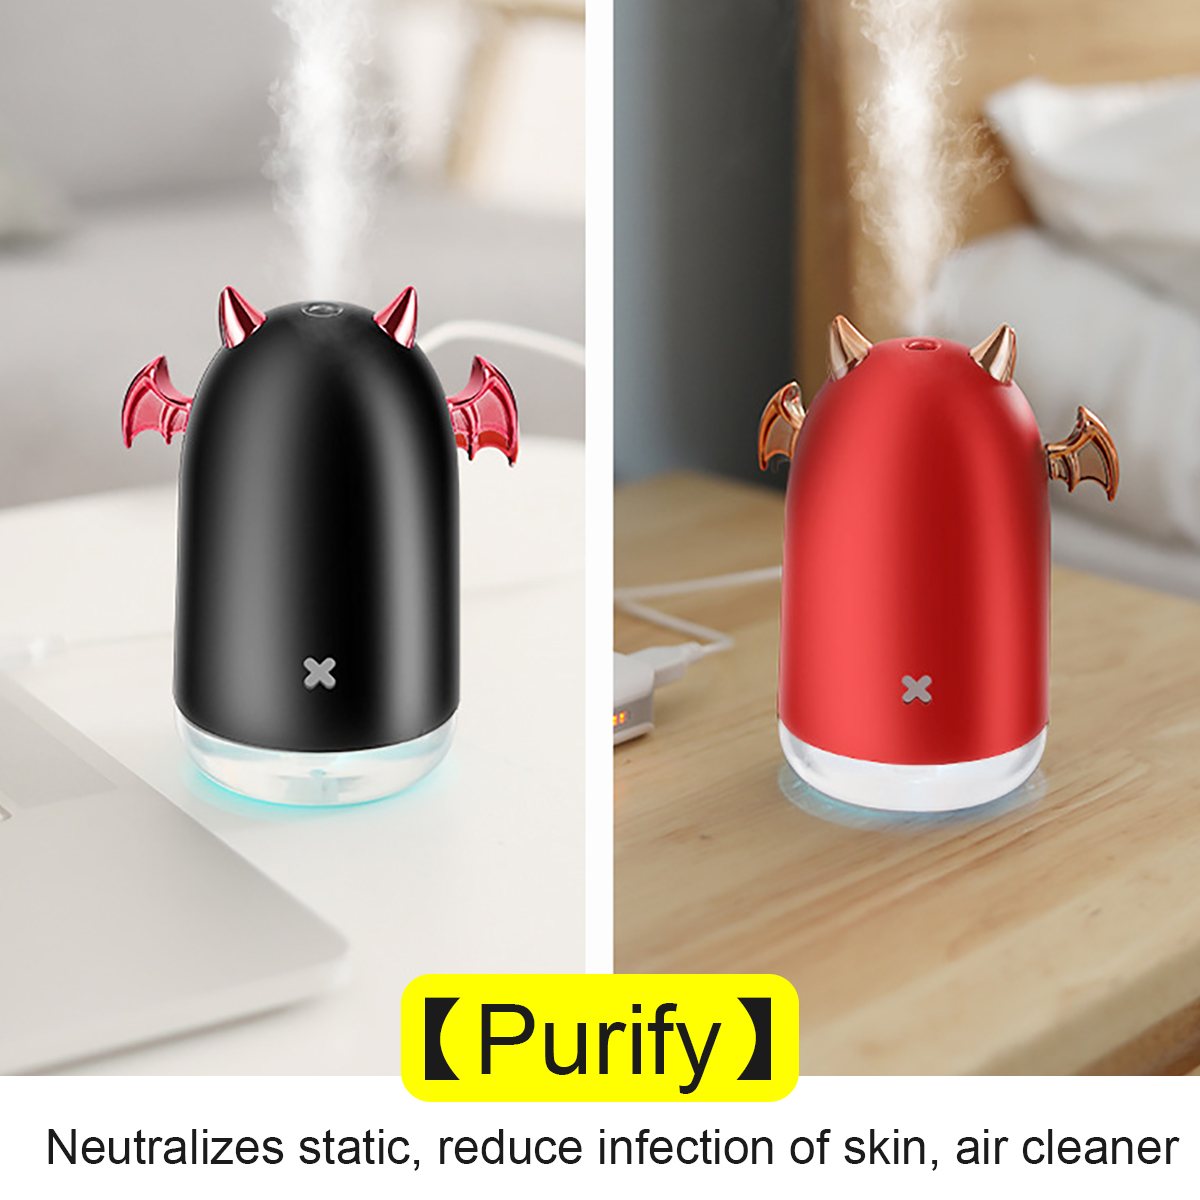 7-LED-Humidifier-USB-Purifier-Mist-Aroma-Essential-Oil-Diffuser-Halloween-Gift-1651094-9